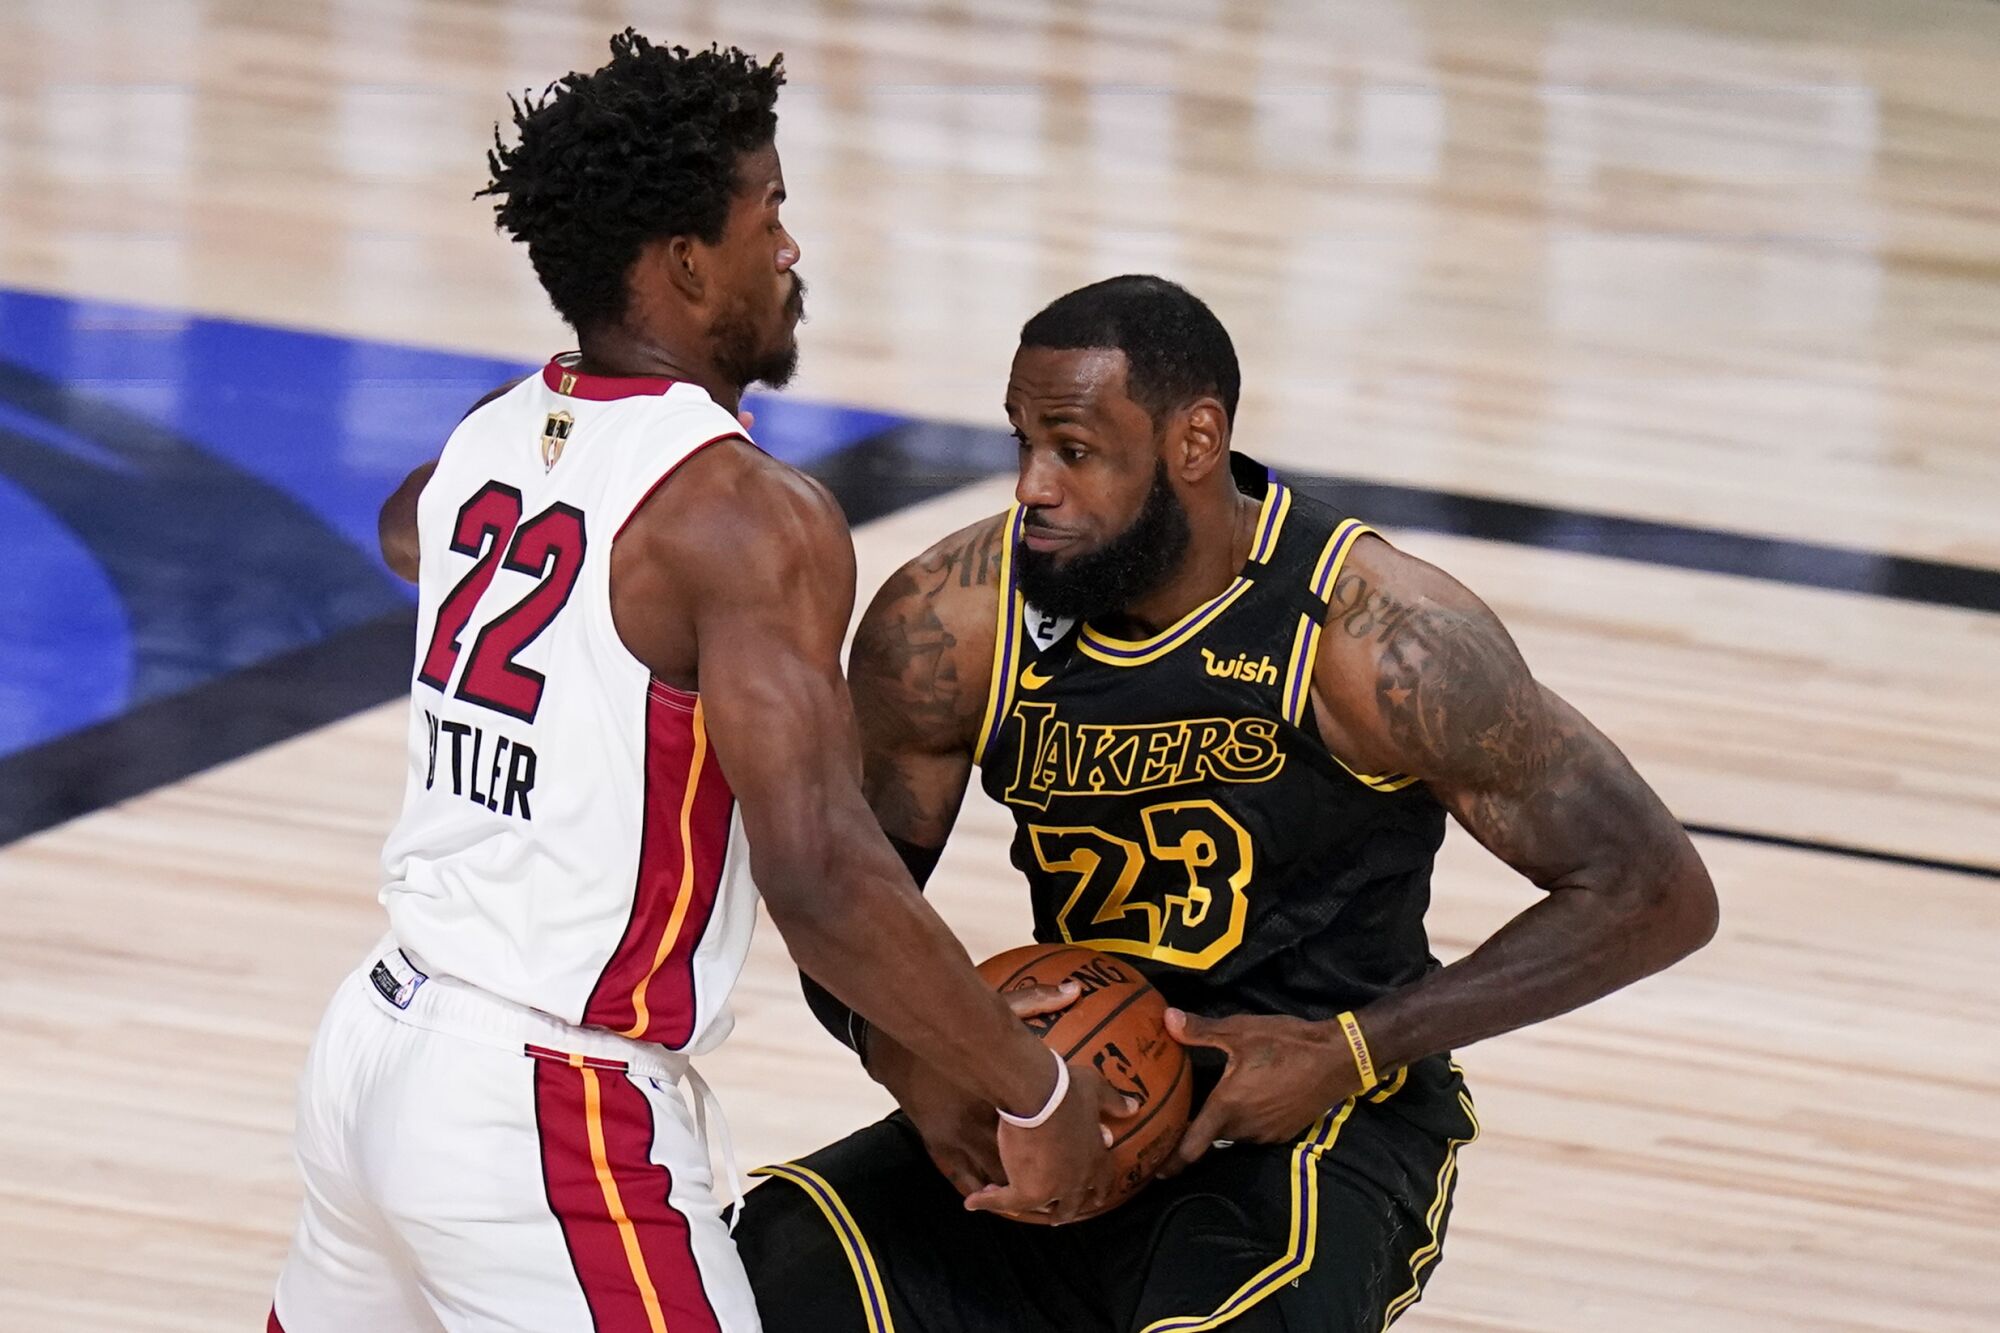 Heat forward Jimmy Butler tries to steal the ball from Lakers forward LeBron James during Game 5 on Friday night.